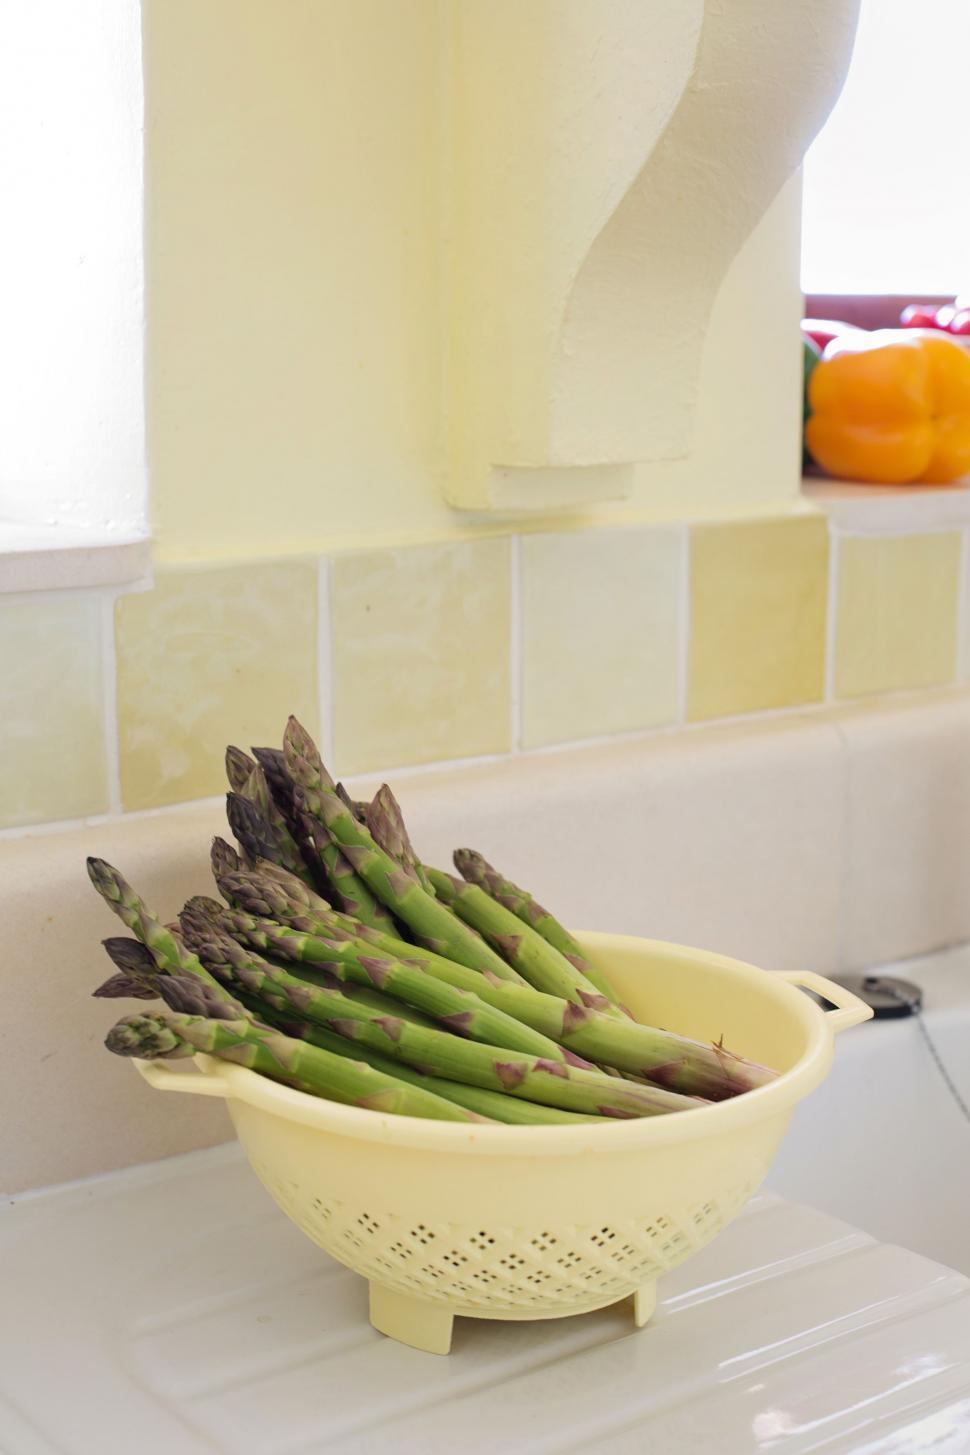 Free Image of Asparagus 